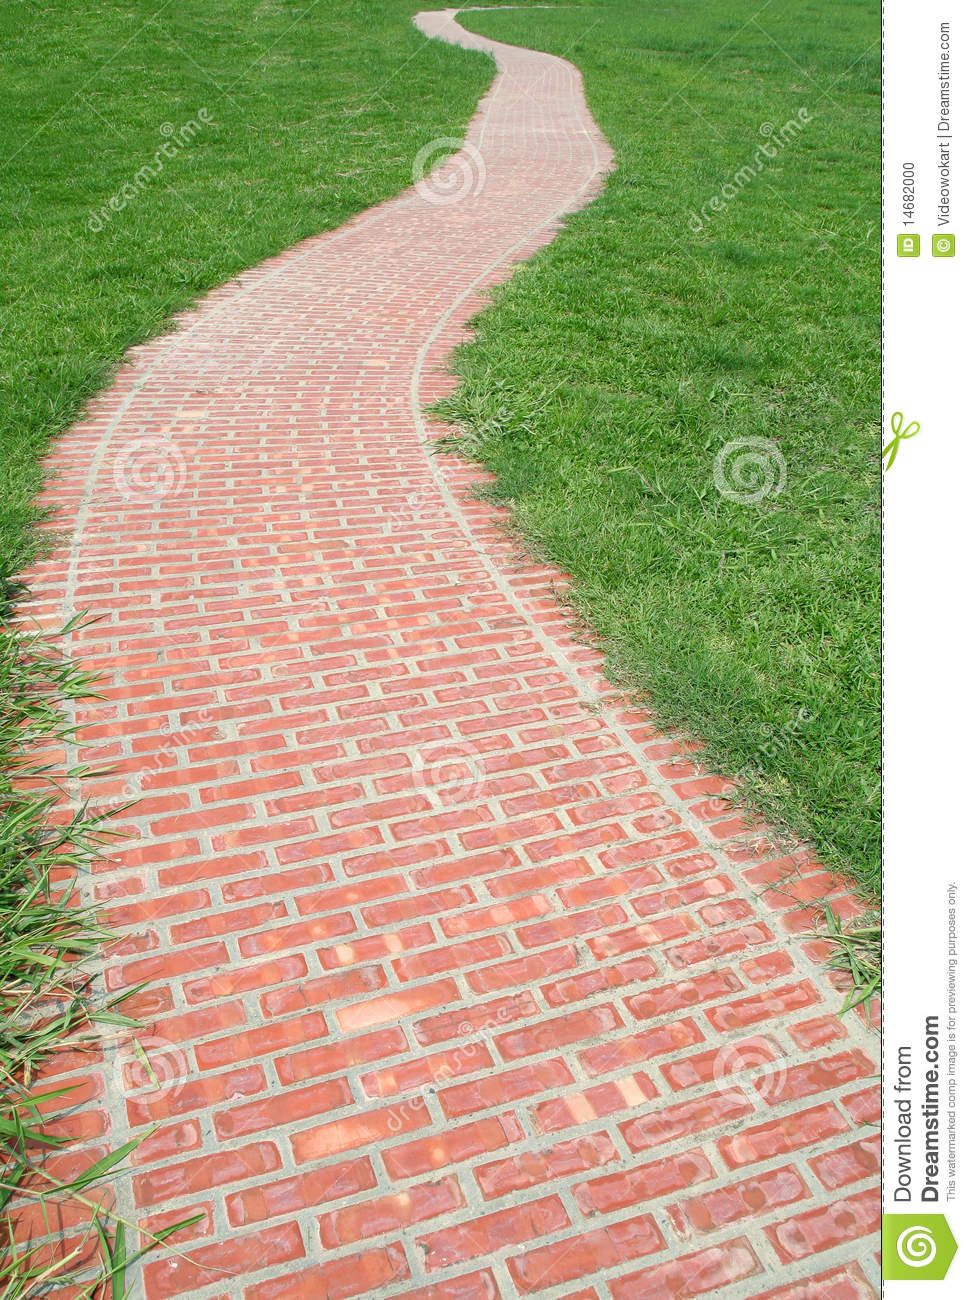 Curved Red Brick Walkway Stock Photo   Image  14682000